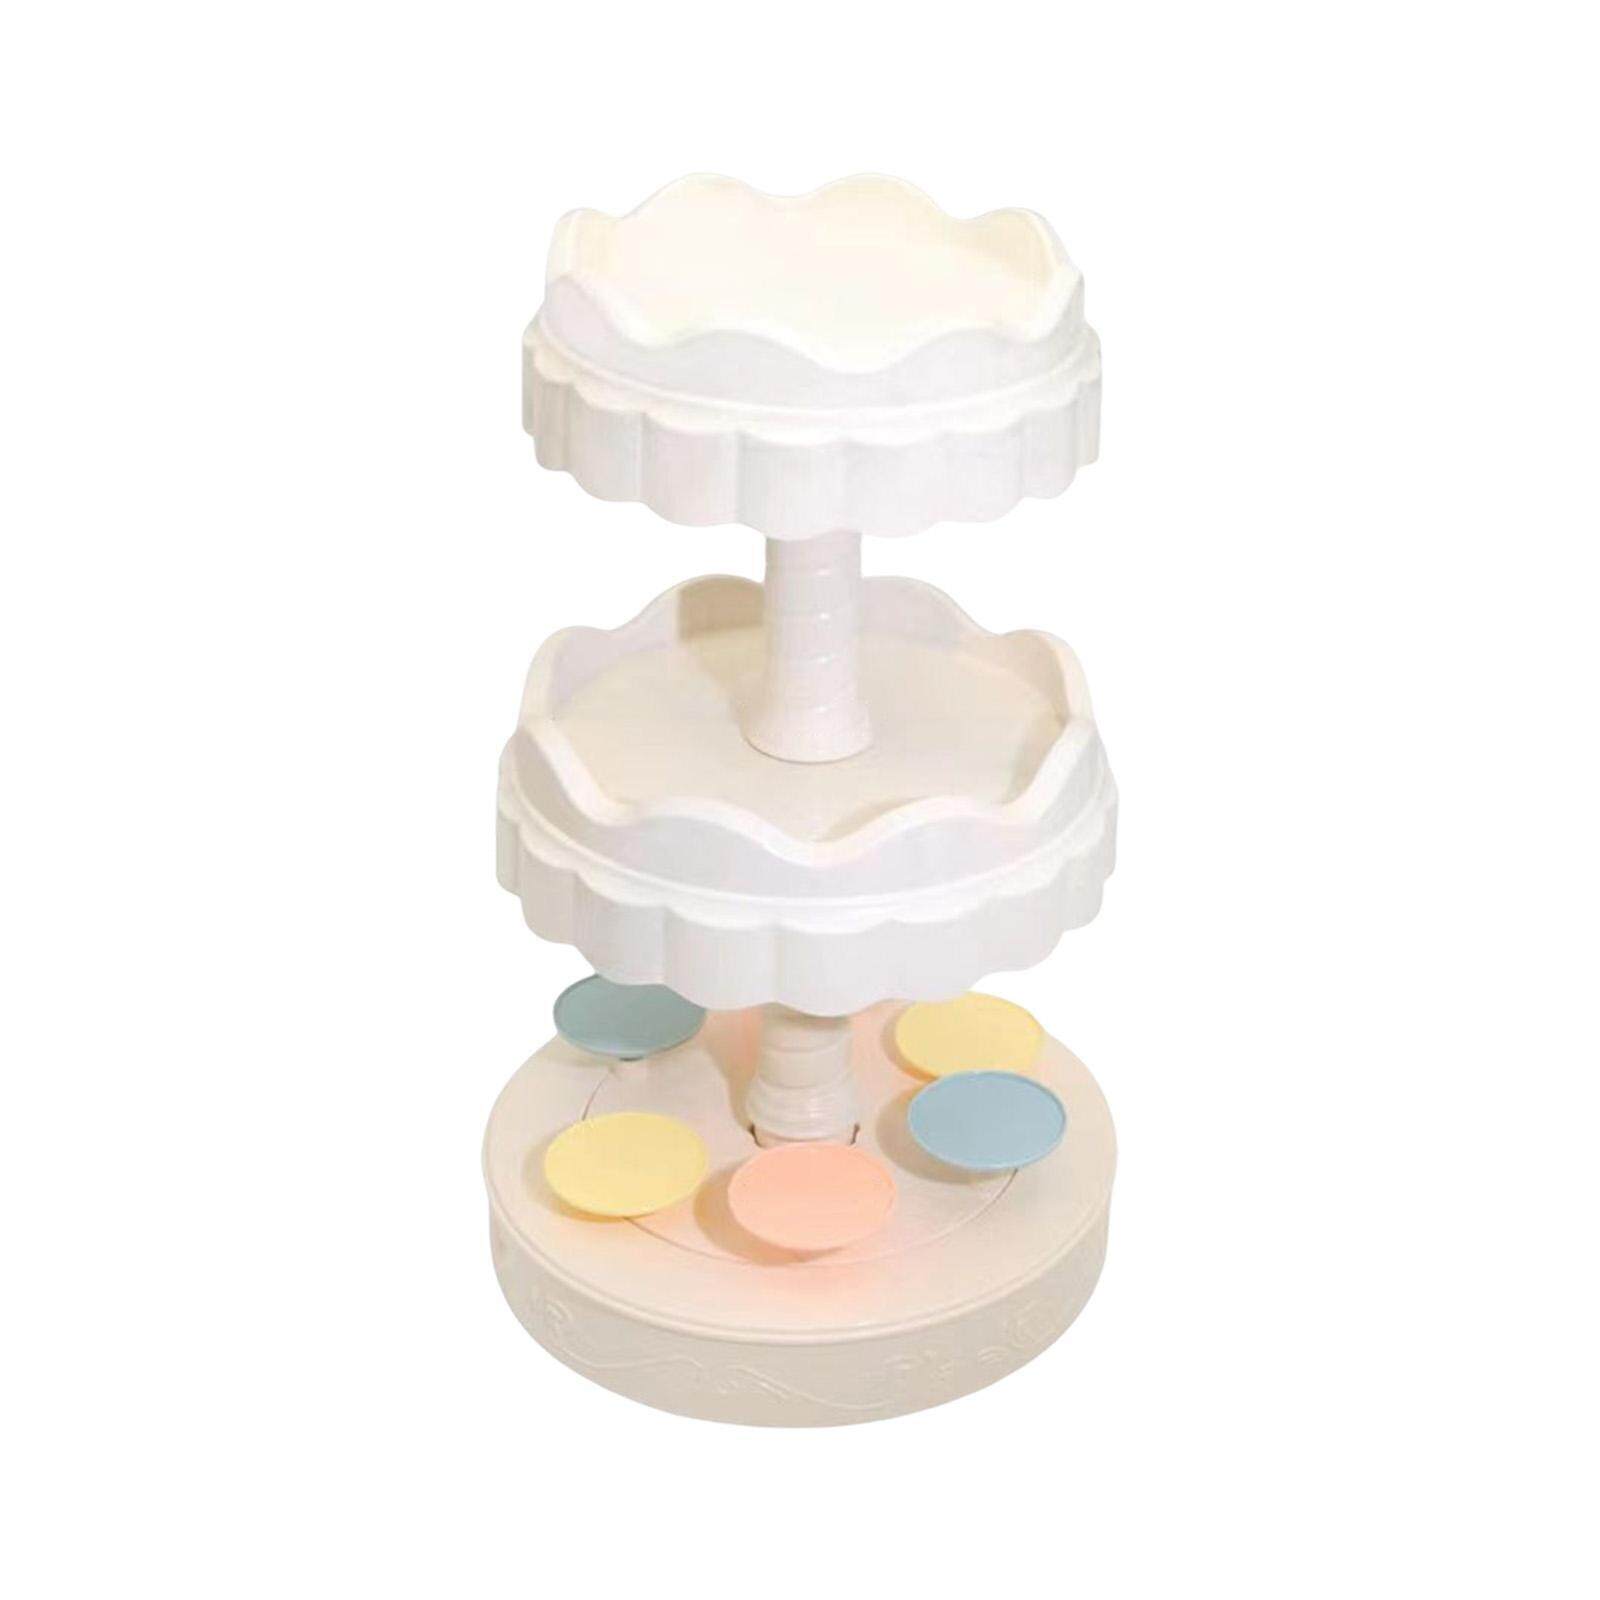 Turntable Cupcake Display Stand Pastries Dessert Cookie for Bakery  Ornaments Rotating Turntable Stand Home Ornaments Rotating Birthday 